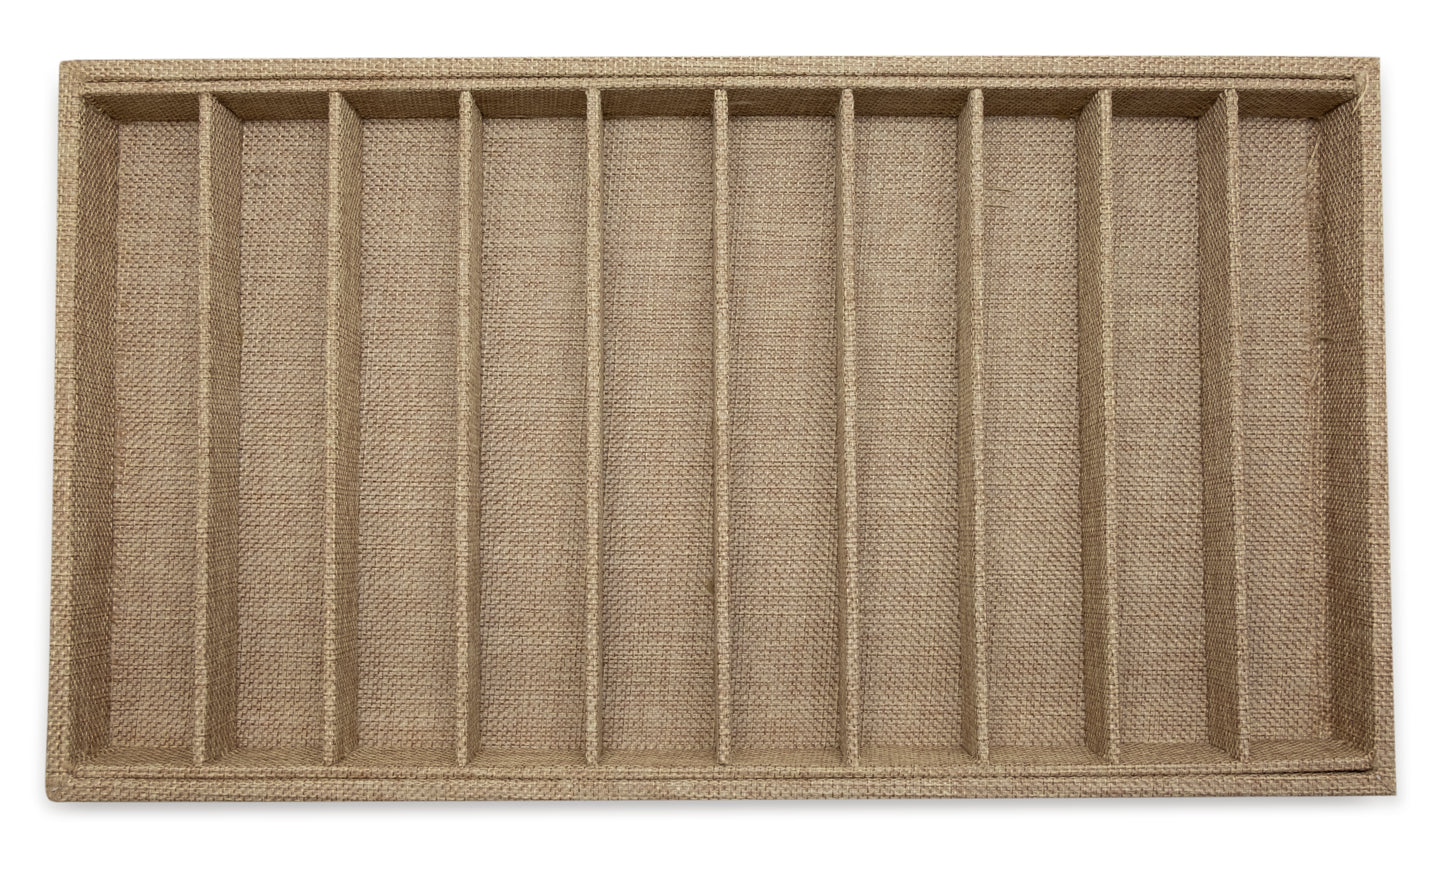 Deluxe Burlap 10 Column Compartment Jewelry Display Tray